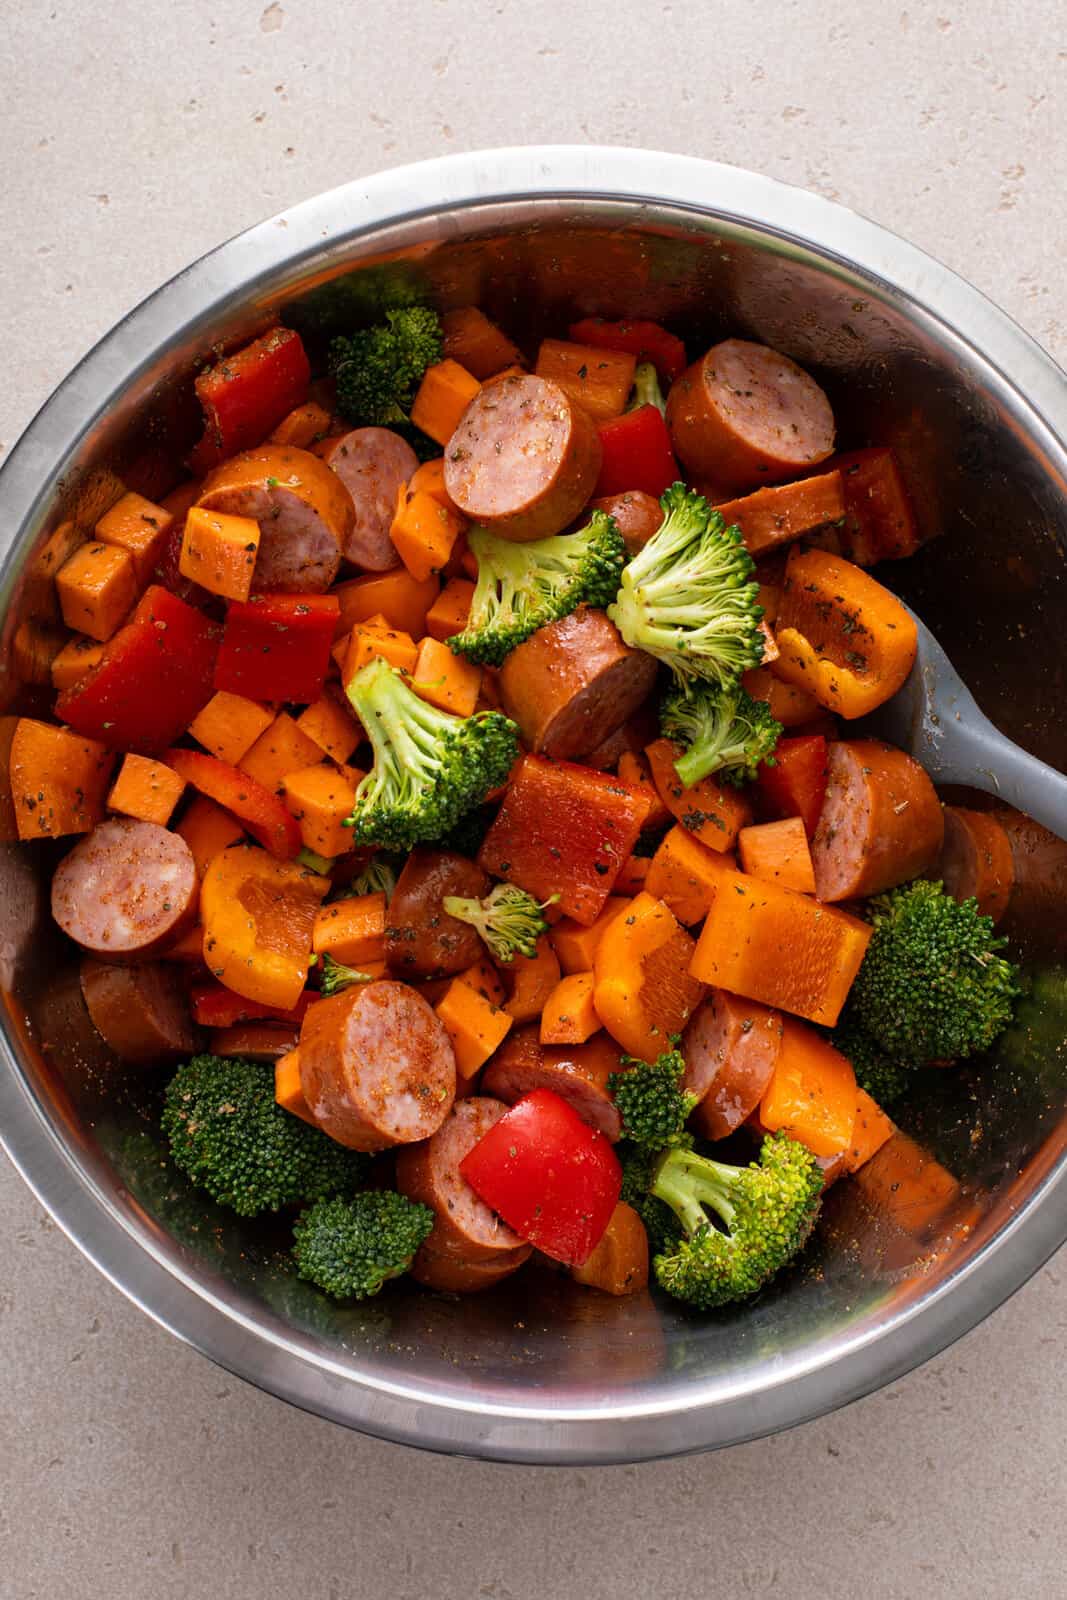 Smoked sausage and diced vegetables being mixed together in a metal bowl.